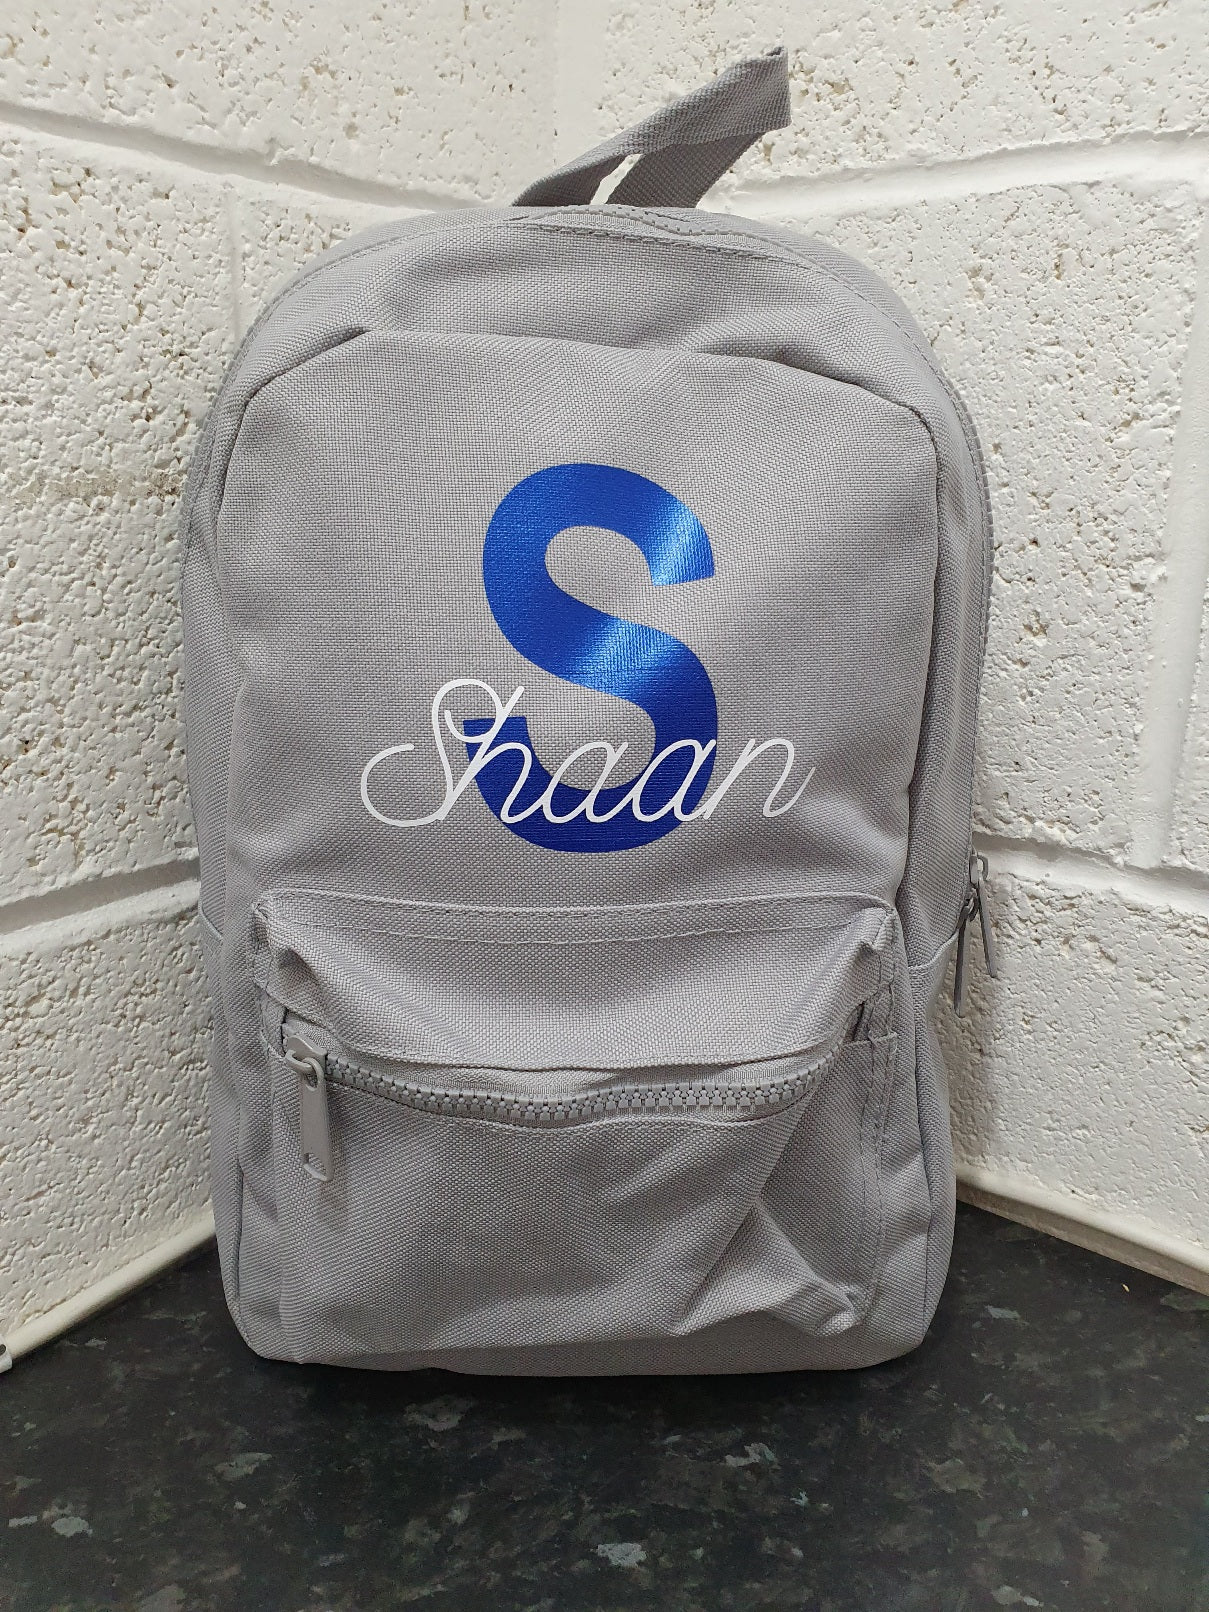 kids personalised backpacks for young children and toddlers